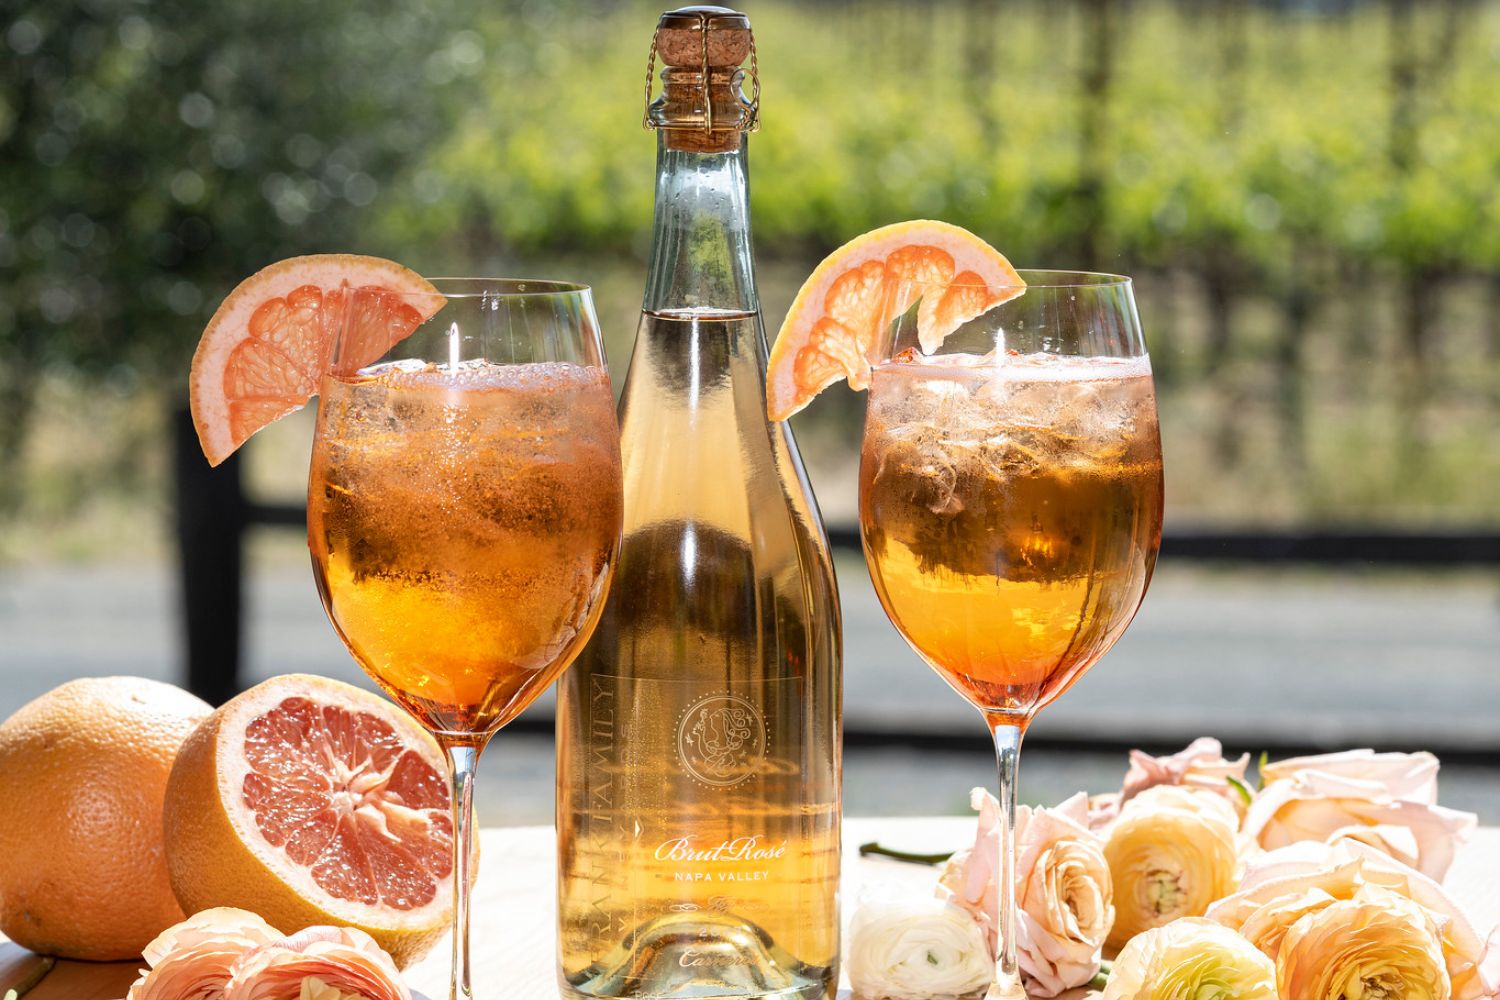 two glasses of aperol spritz next to a bottle of brut rosé